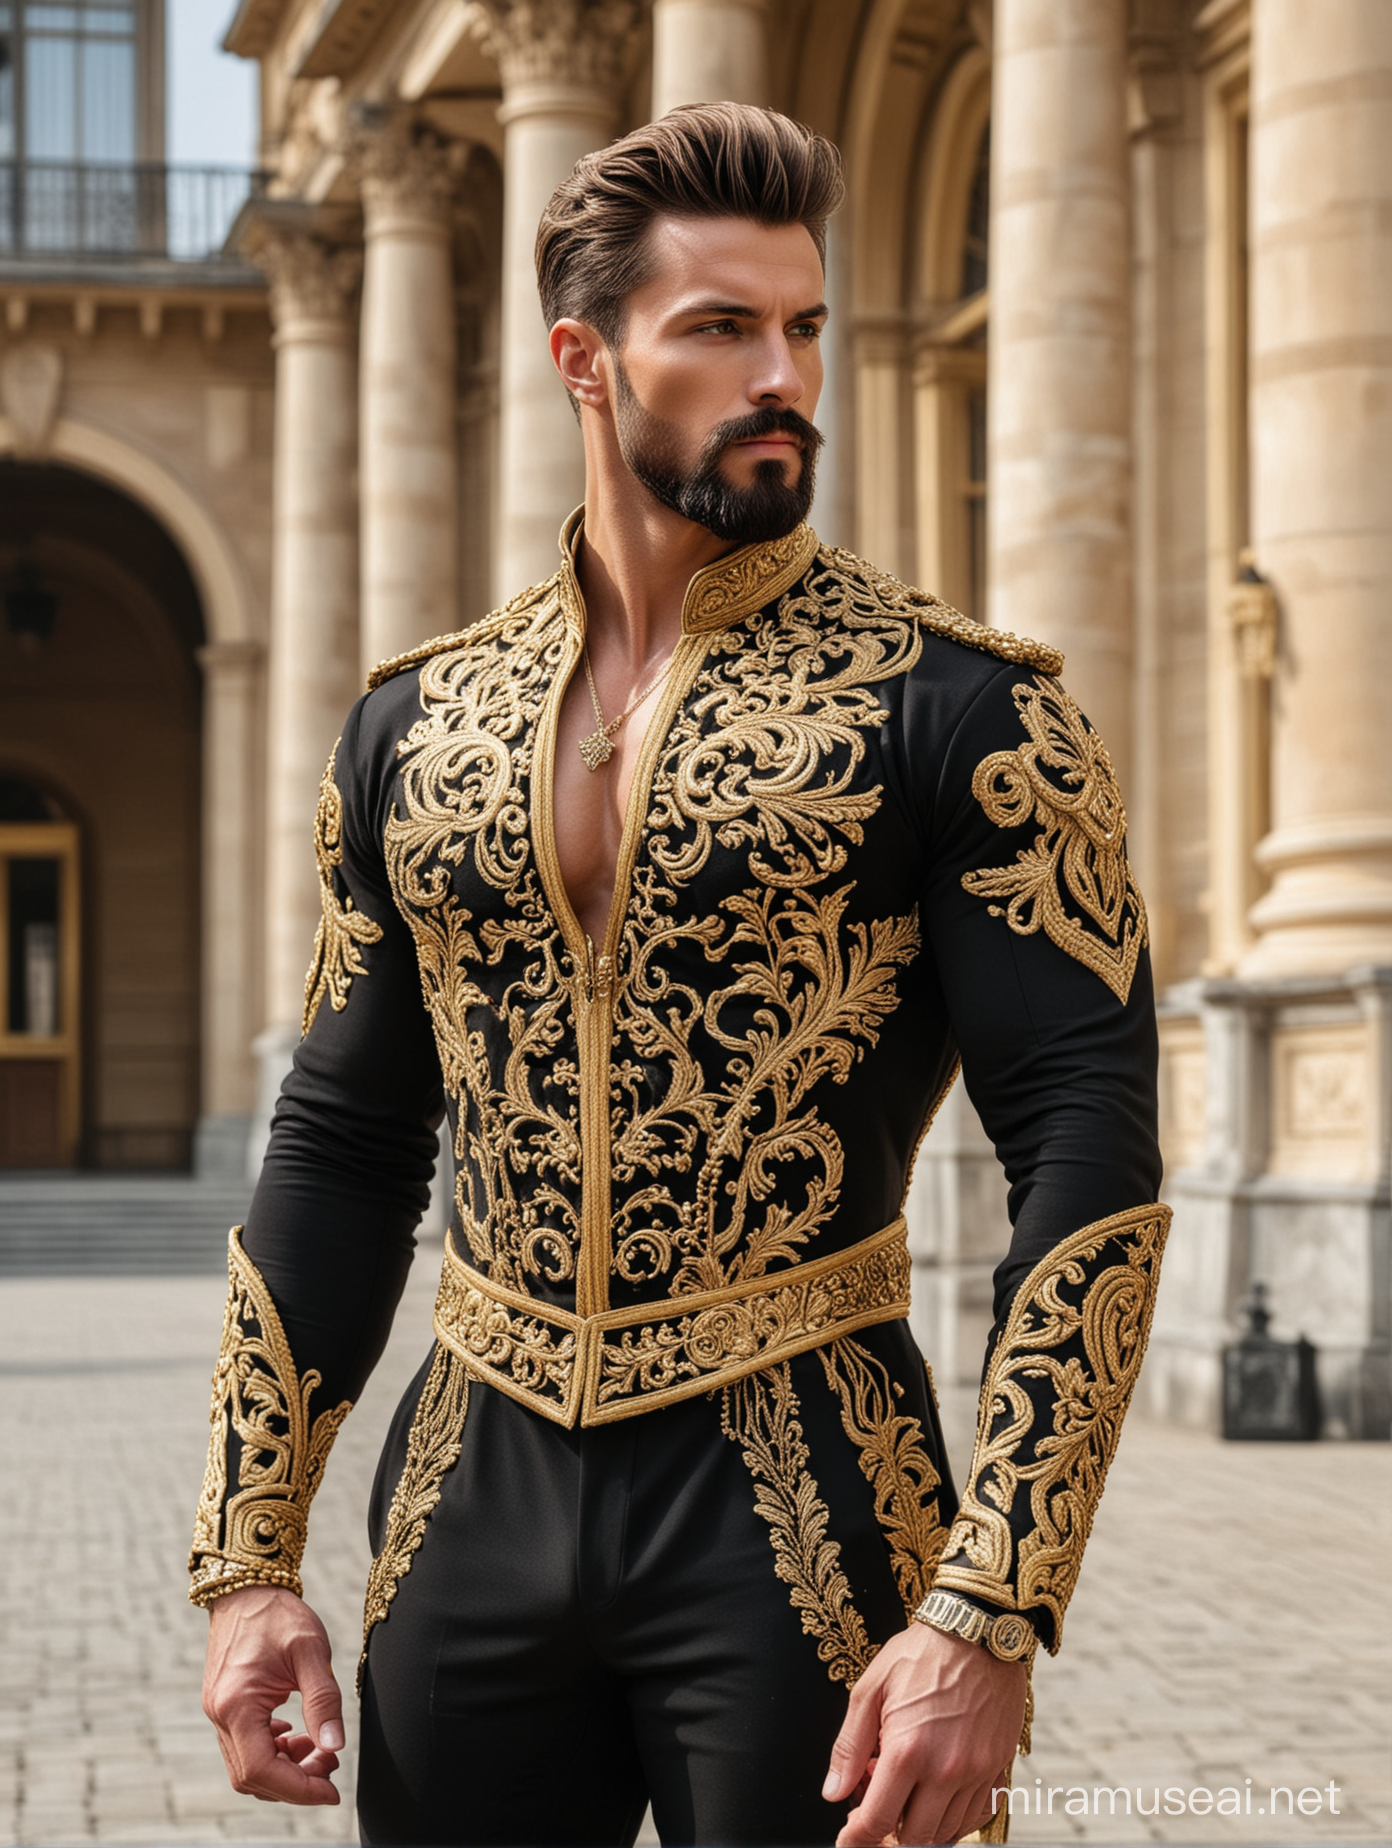 Regal Bodybuilder King in Golden Cavalry Suit Outside Palace